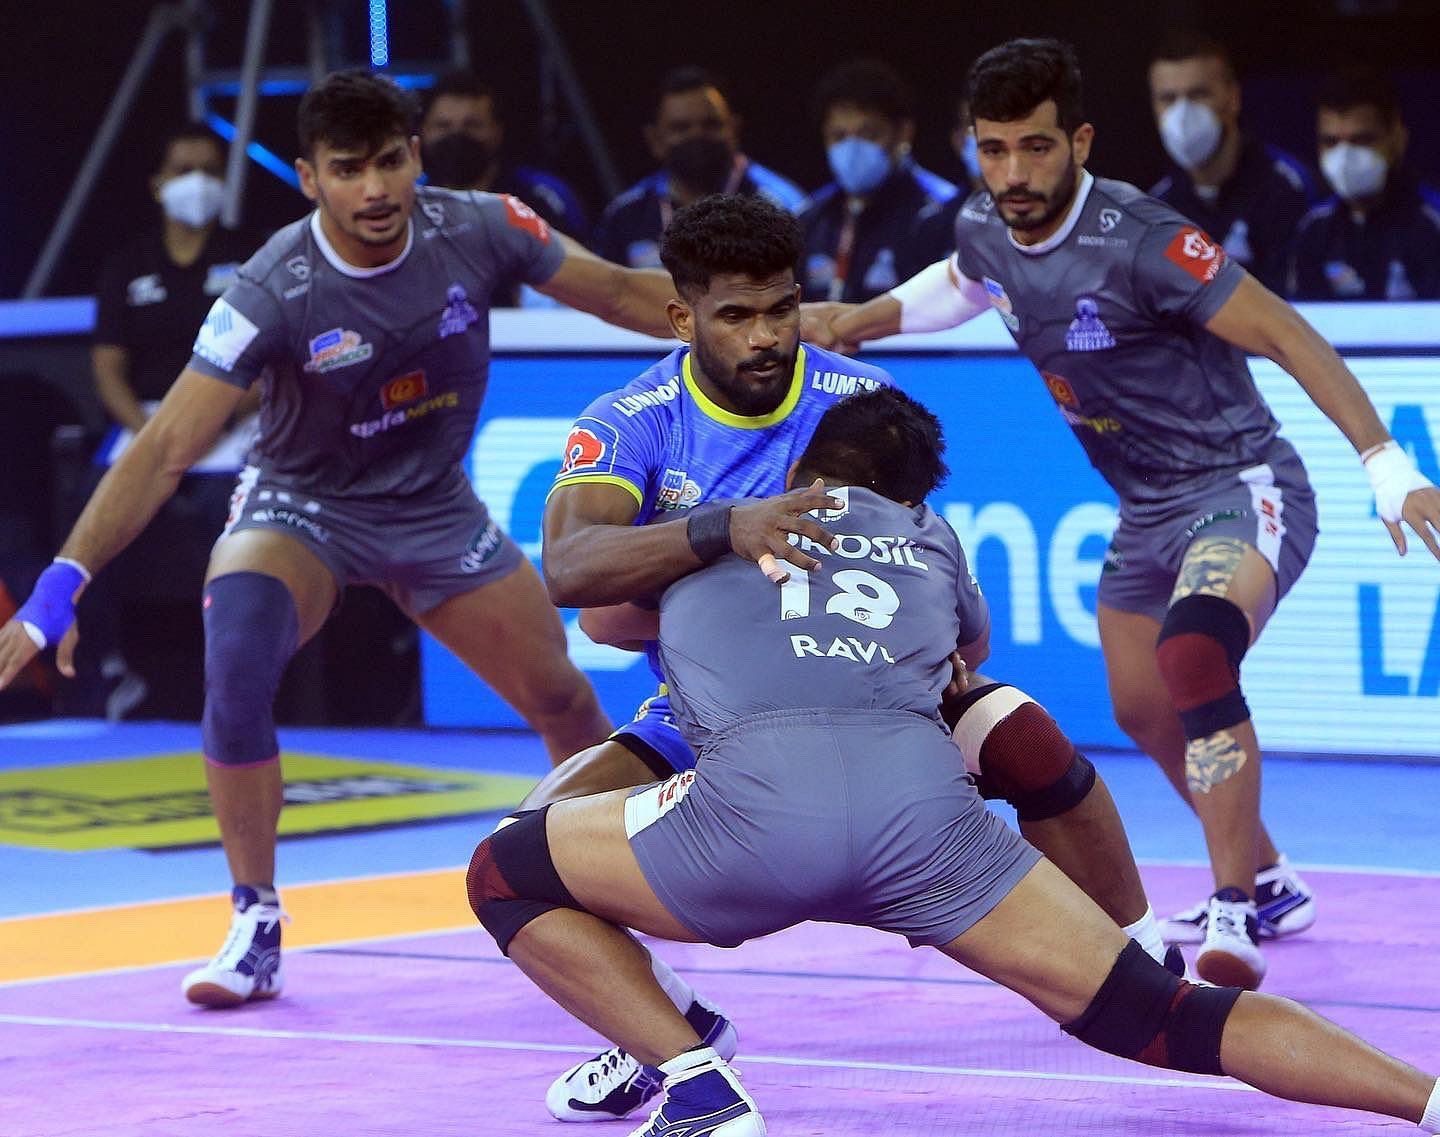 Pro Kabaddi League 2022, Haryana Steelers vs Puneri Paltan: Who will win today’s PKL match, and telecast details